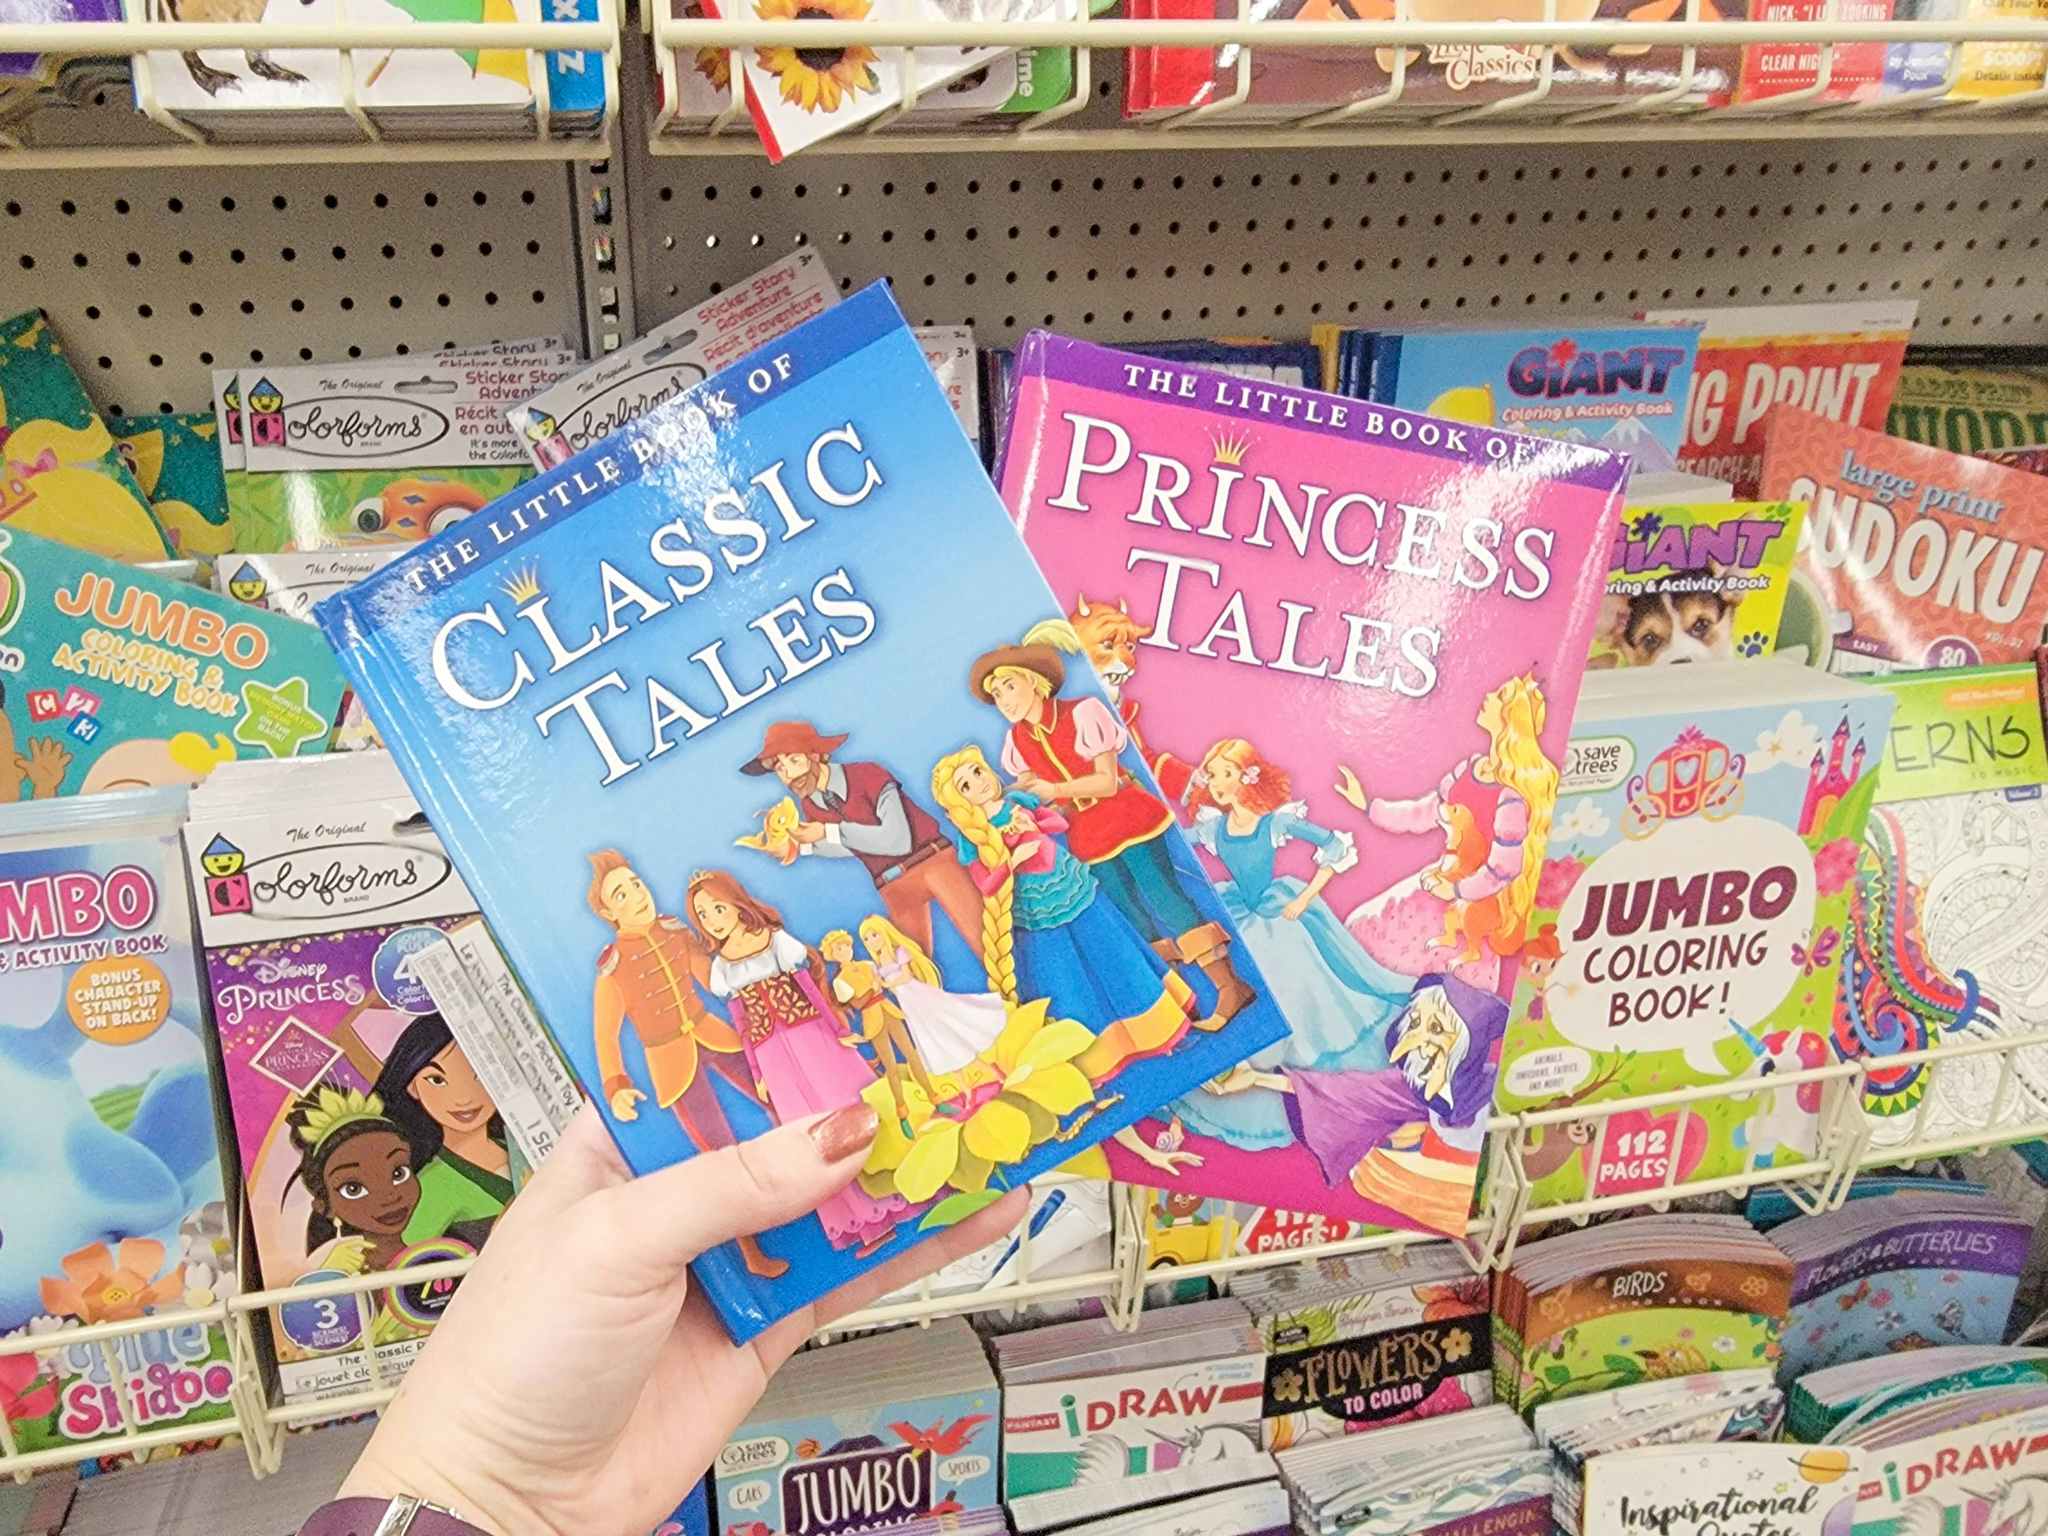 hand holding 2 kids books: classic tales and princess tales